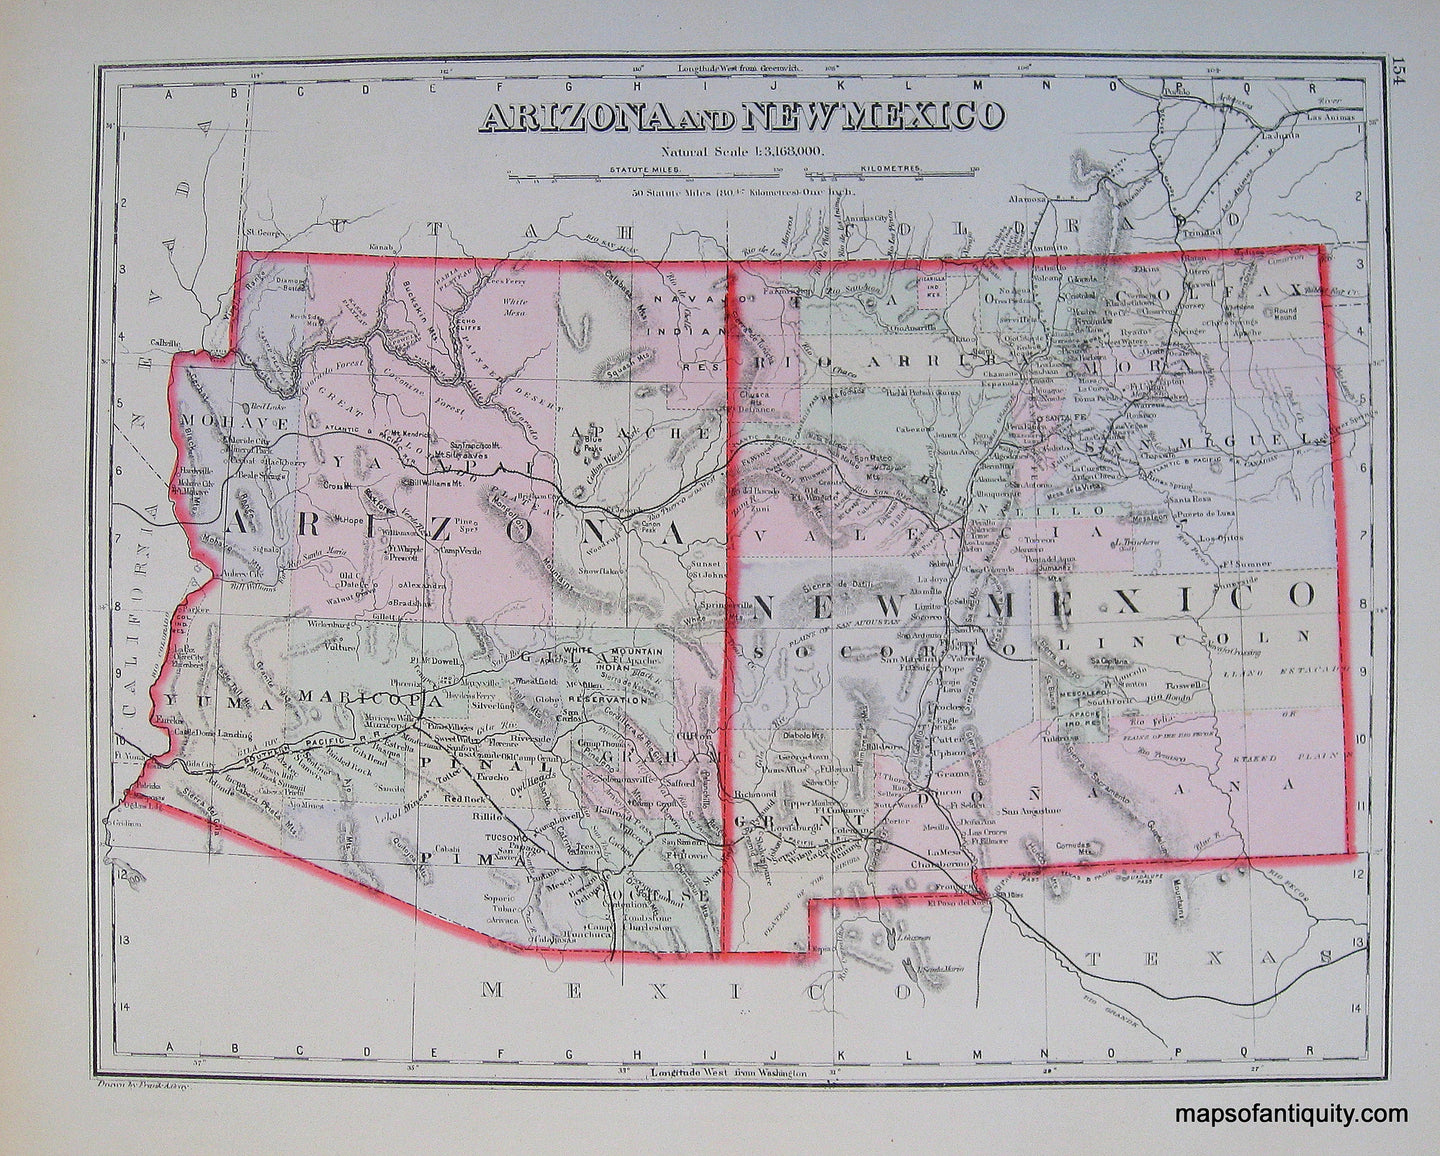 Antique-Hand-Colored-Map-Utah-Arizona-and-New-Mexico-******-United-States-Utah-1884-Gray-Maps-Of-Antiquity